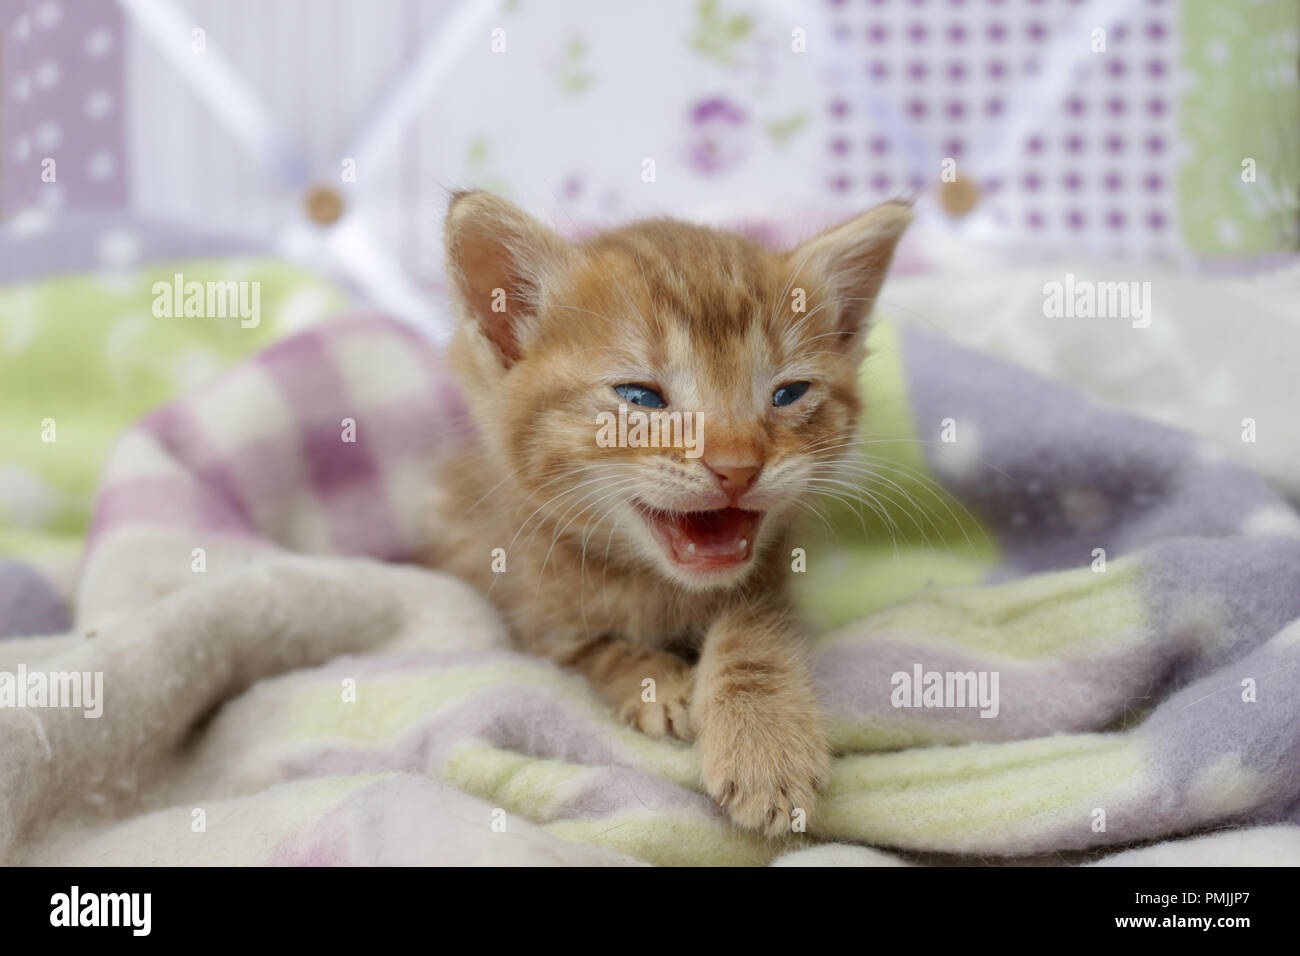 Ginger chaton, 6 semaines, meowing Banque D'Images